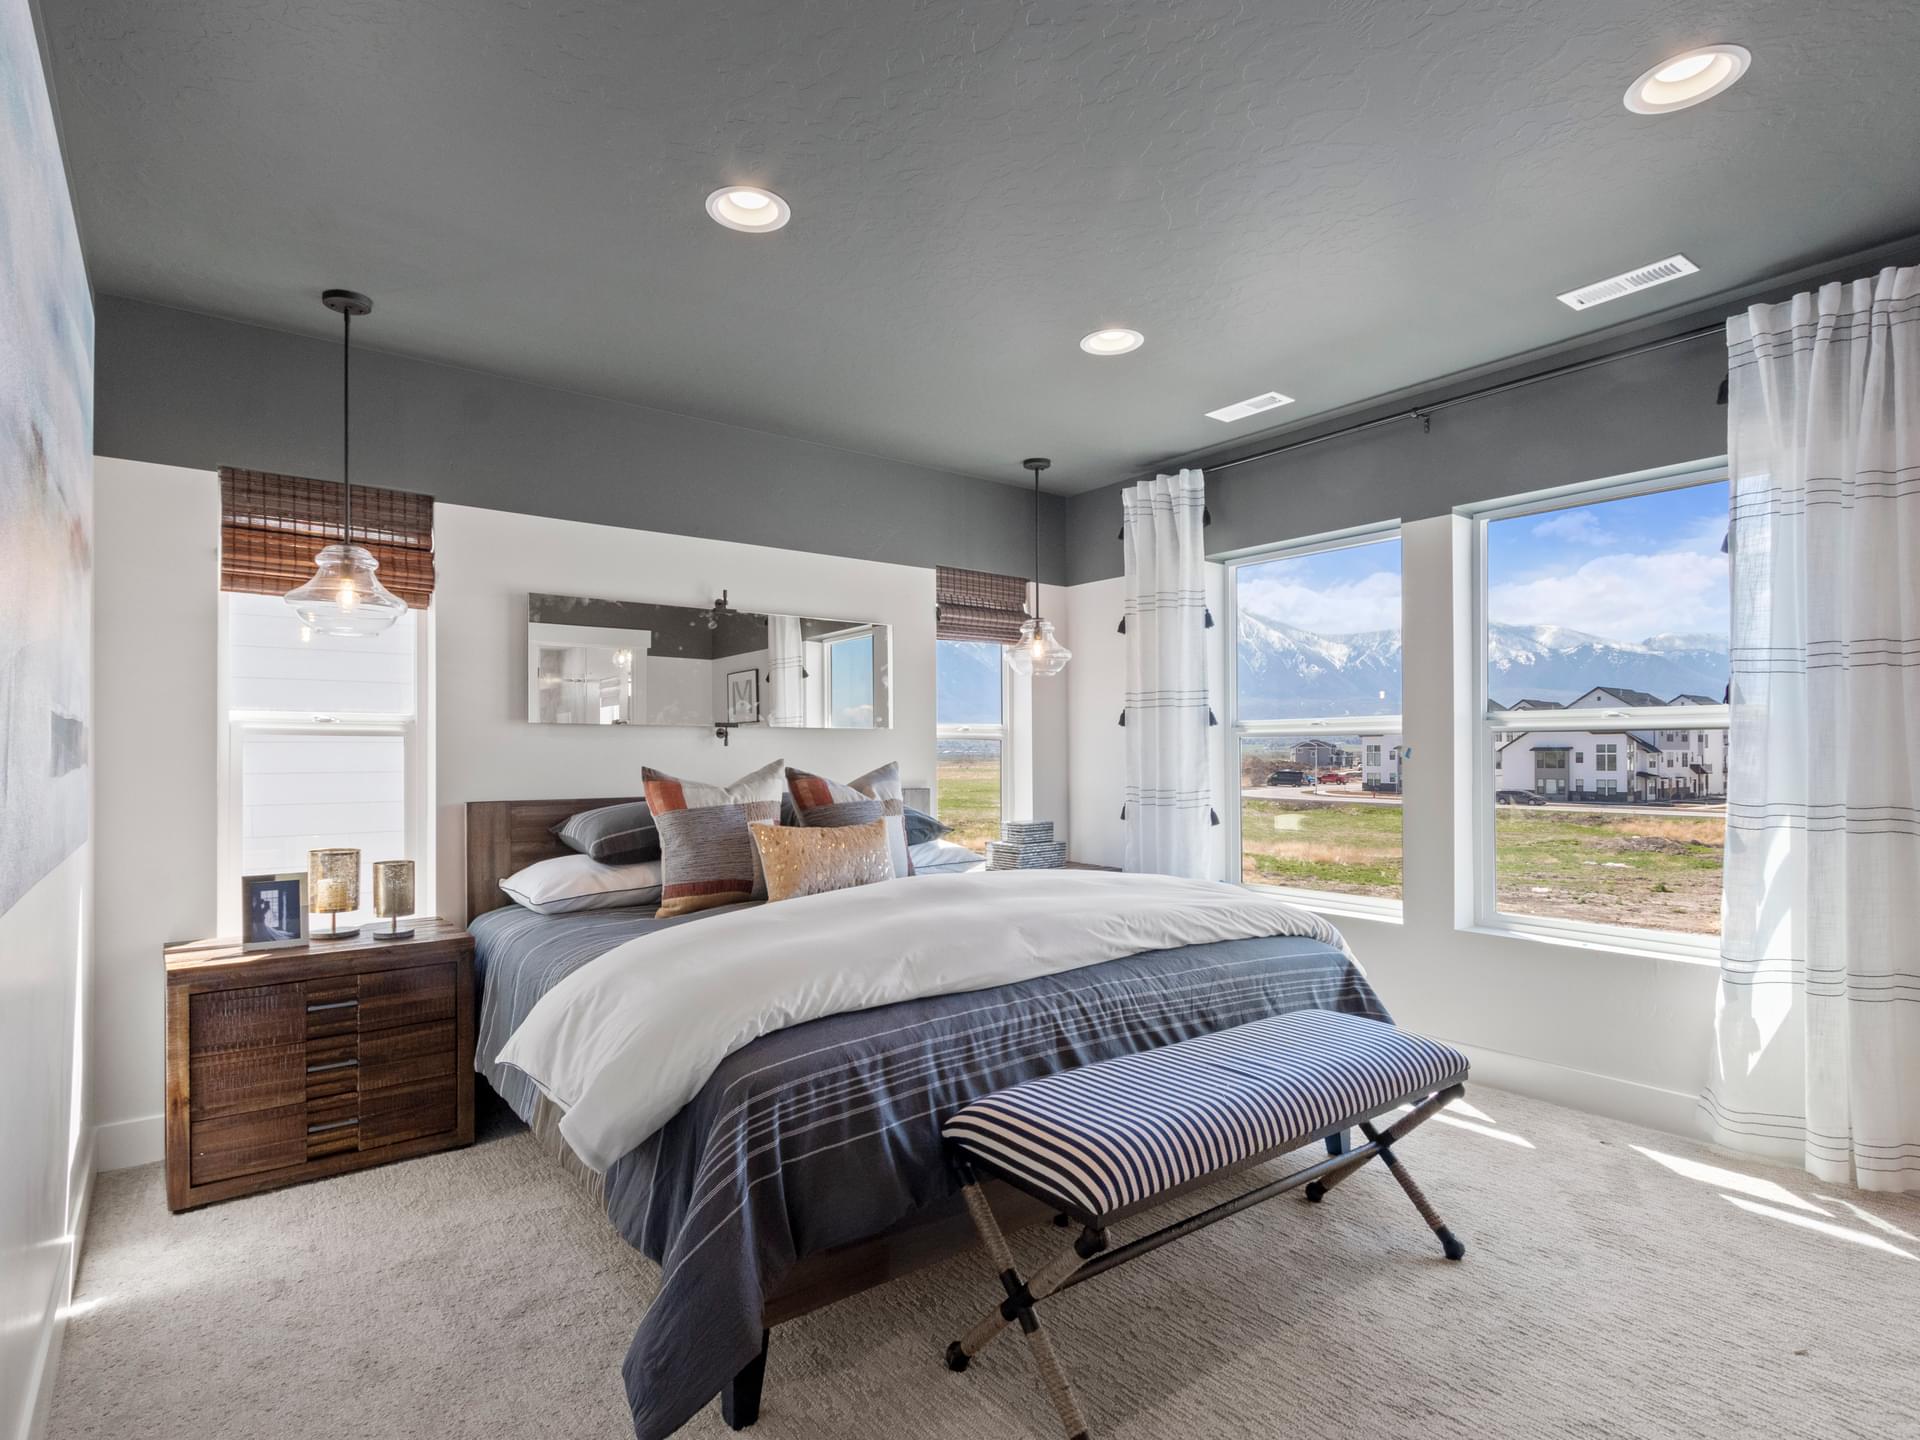 New Home Bedrooms Photos of Fieldstone Homes